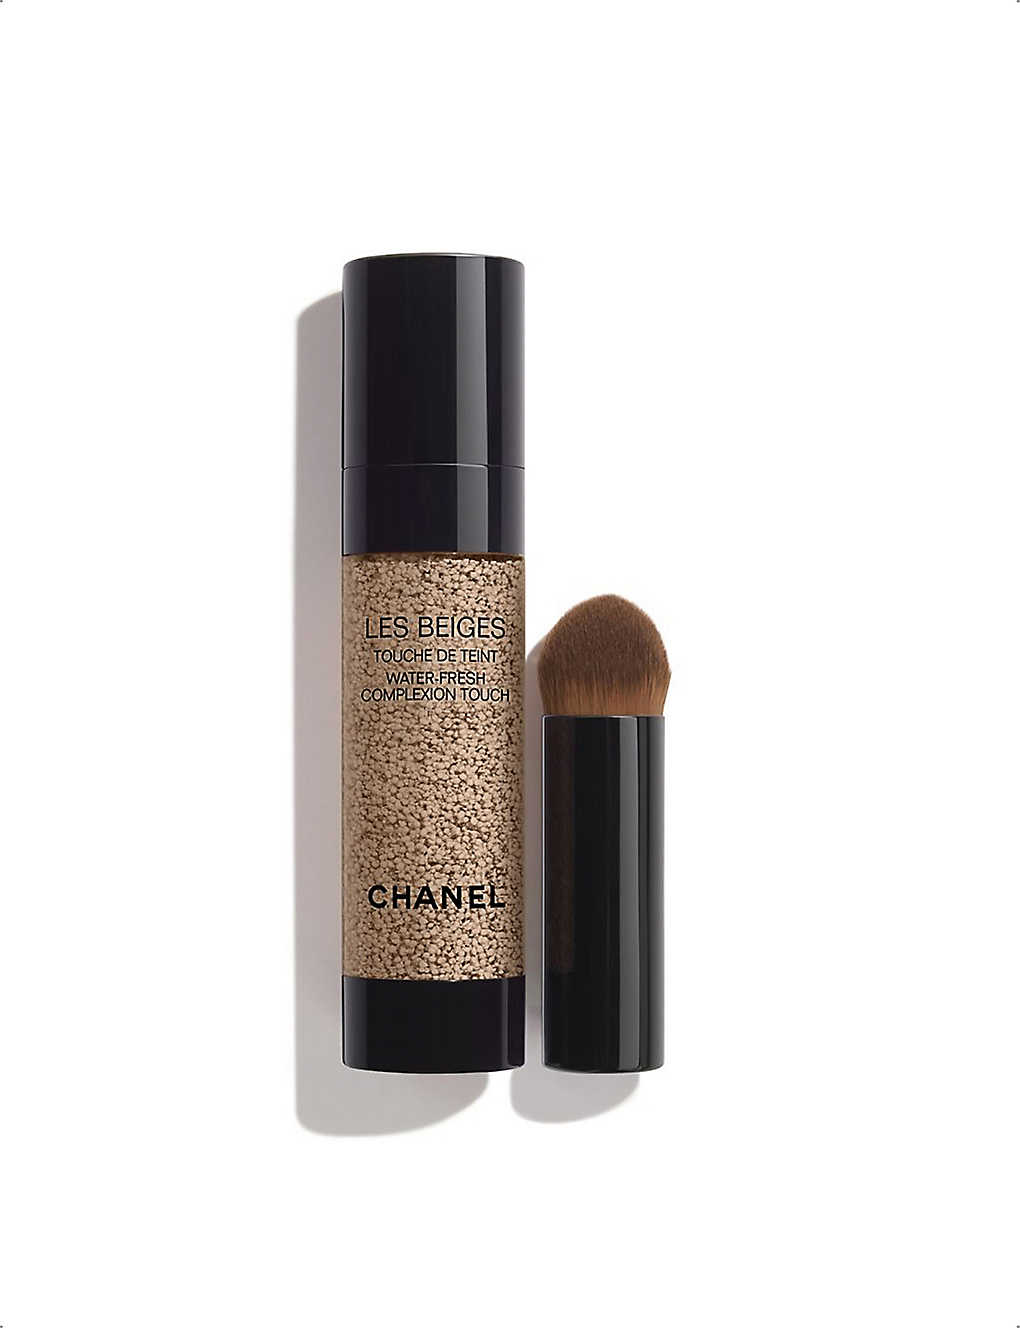 CHANEL - LES BEIGES WATER-FRESH COMPLEXION TOUCH Even – Illuminate